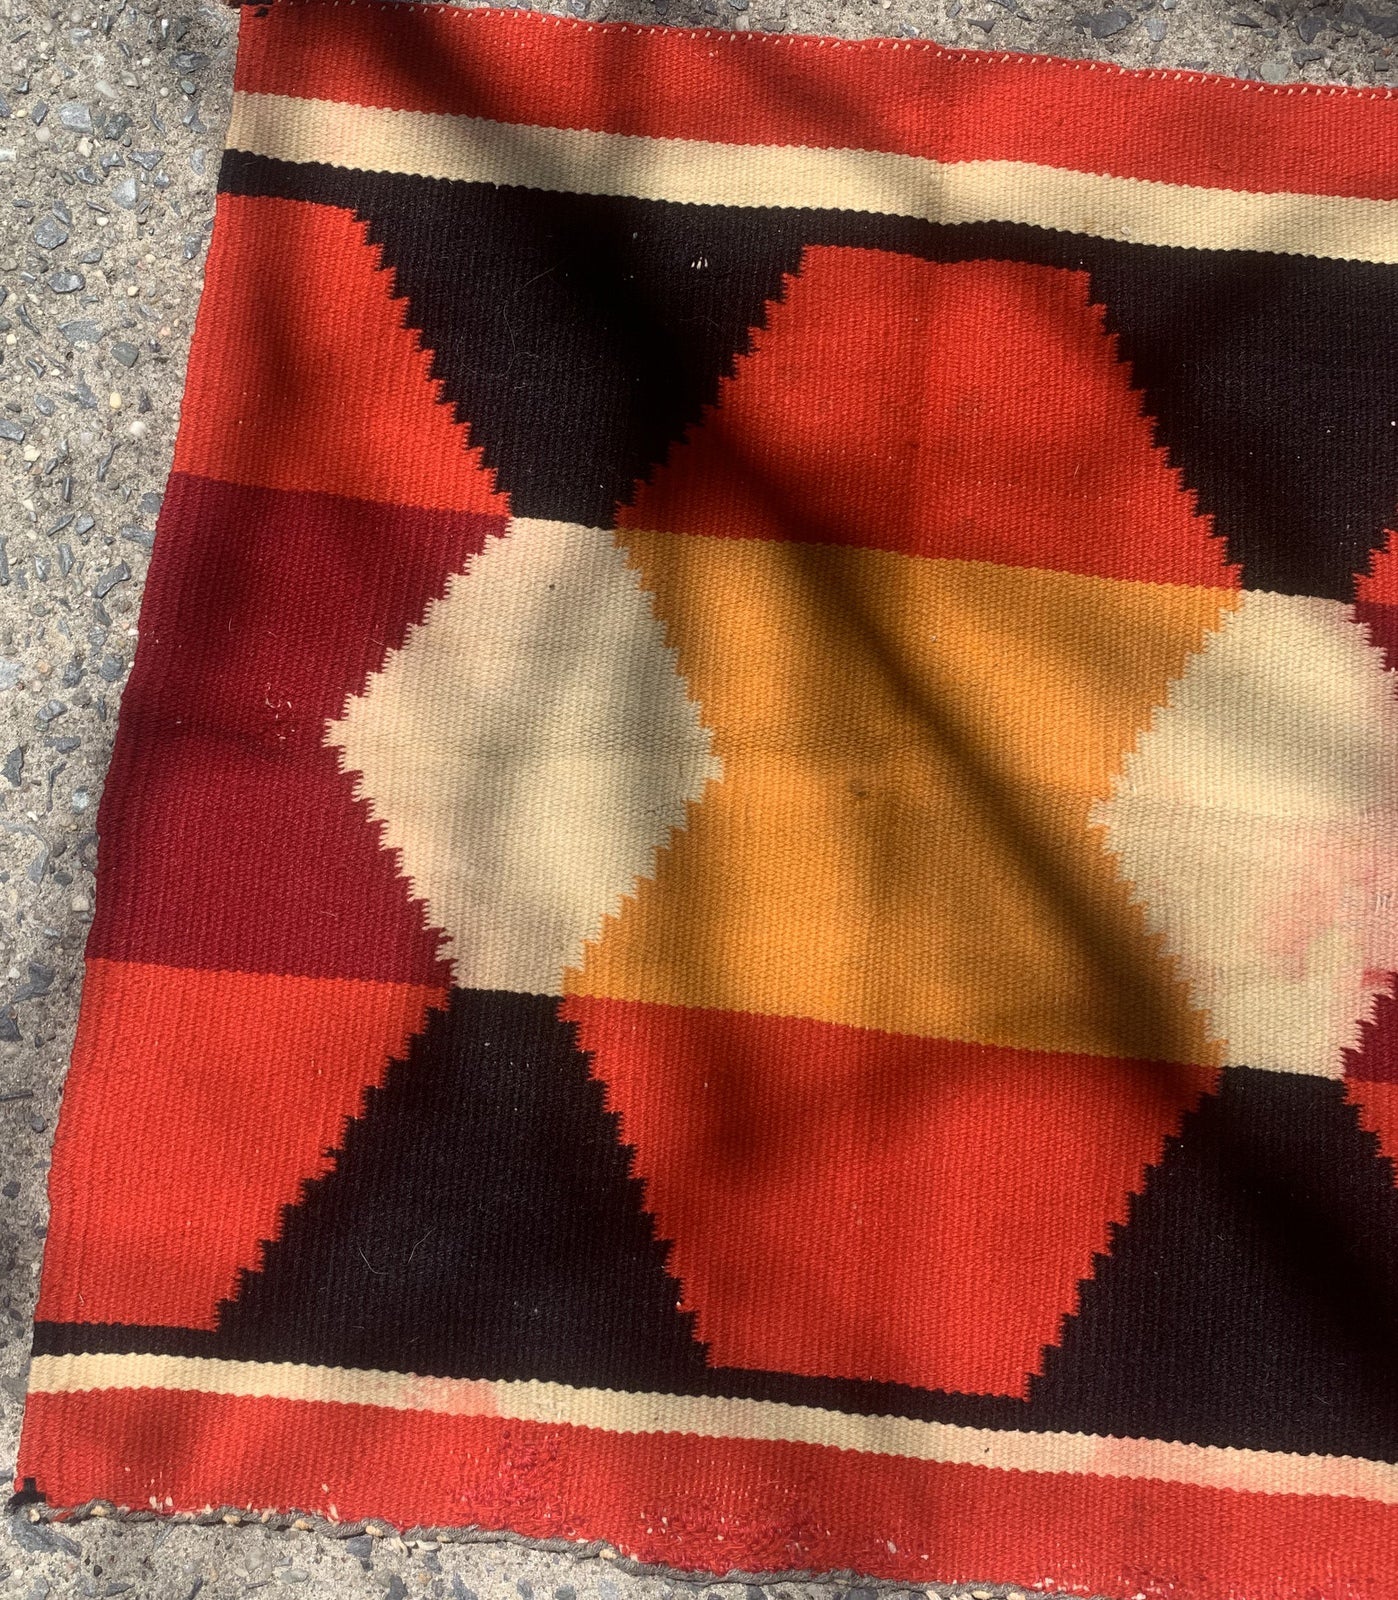 Handmade antique Native American Navajo baby blanket in colorful shades. The rug is from the end of 19th century in original condition, it has some age discolorations.